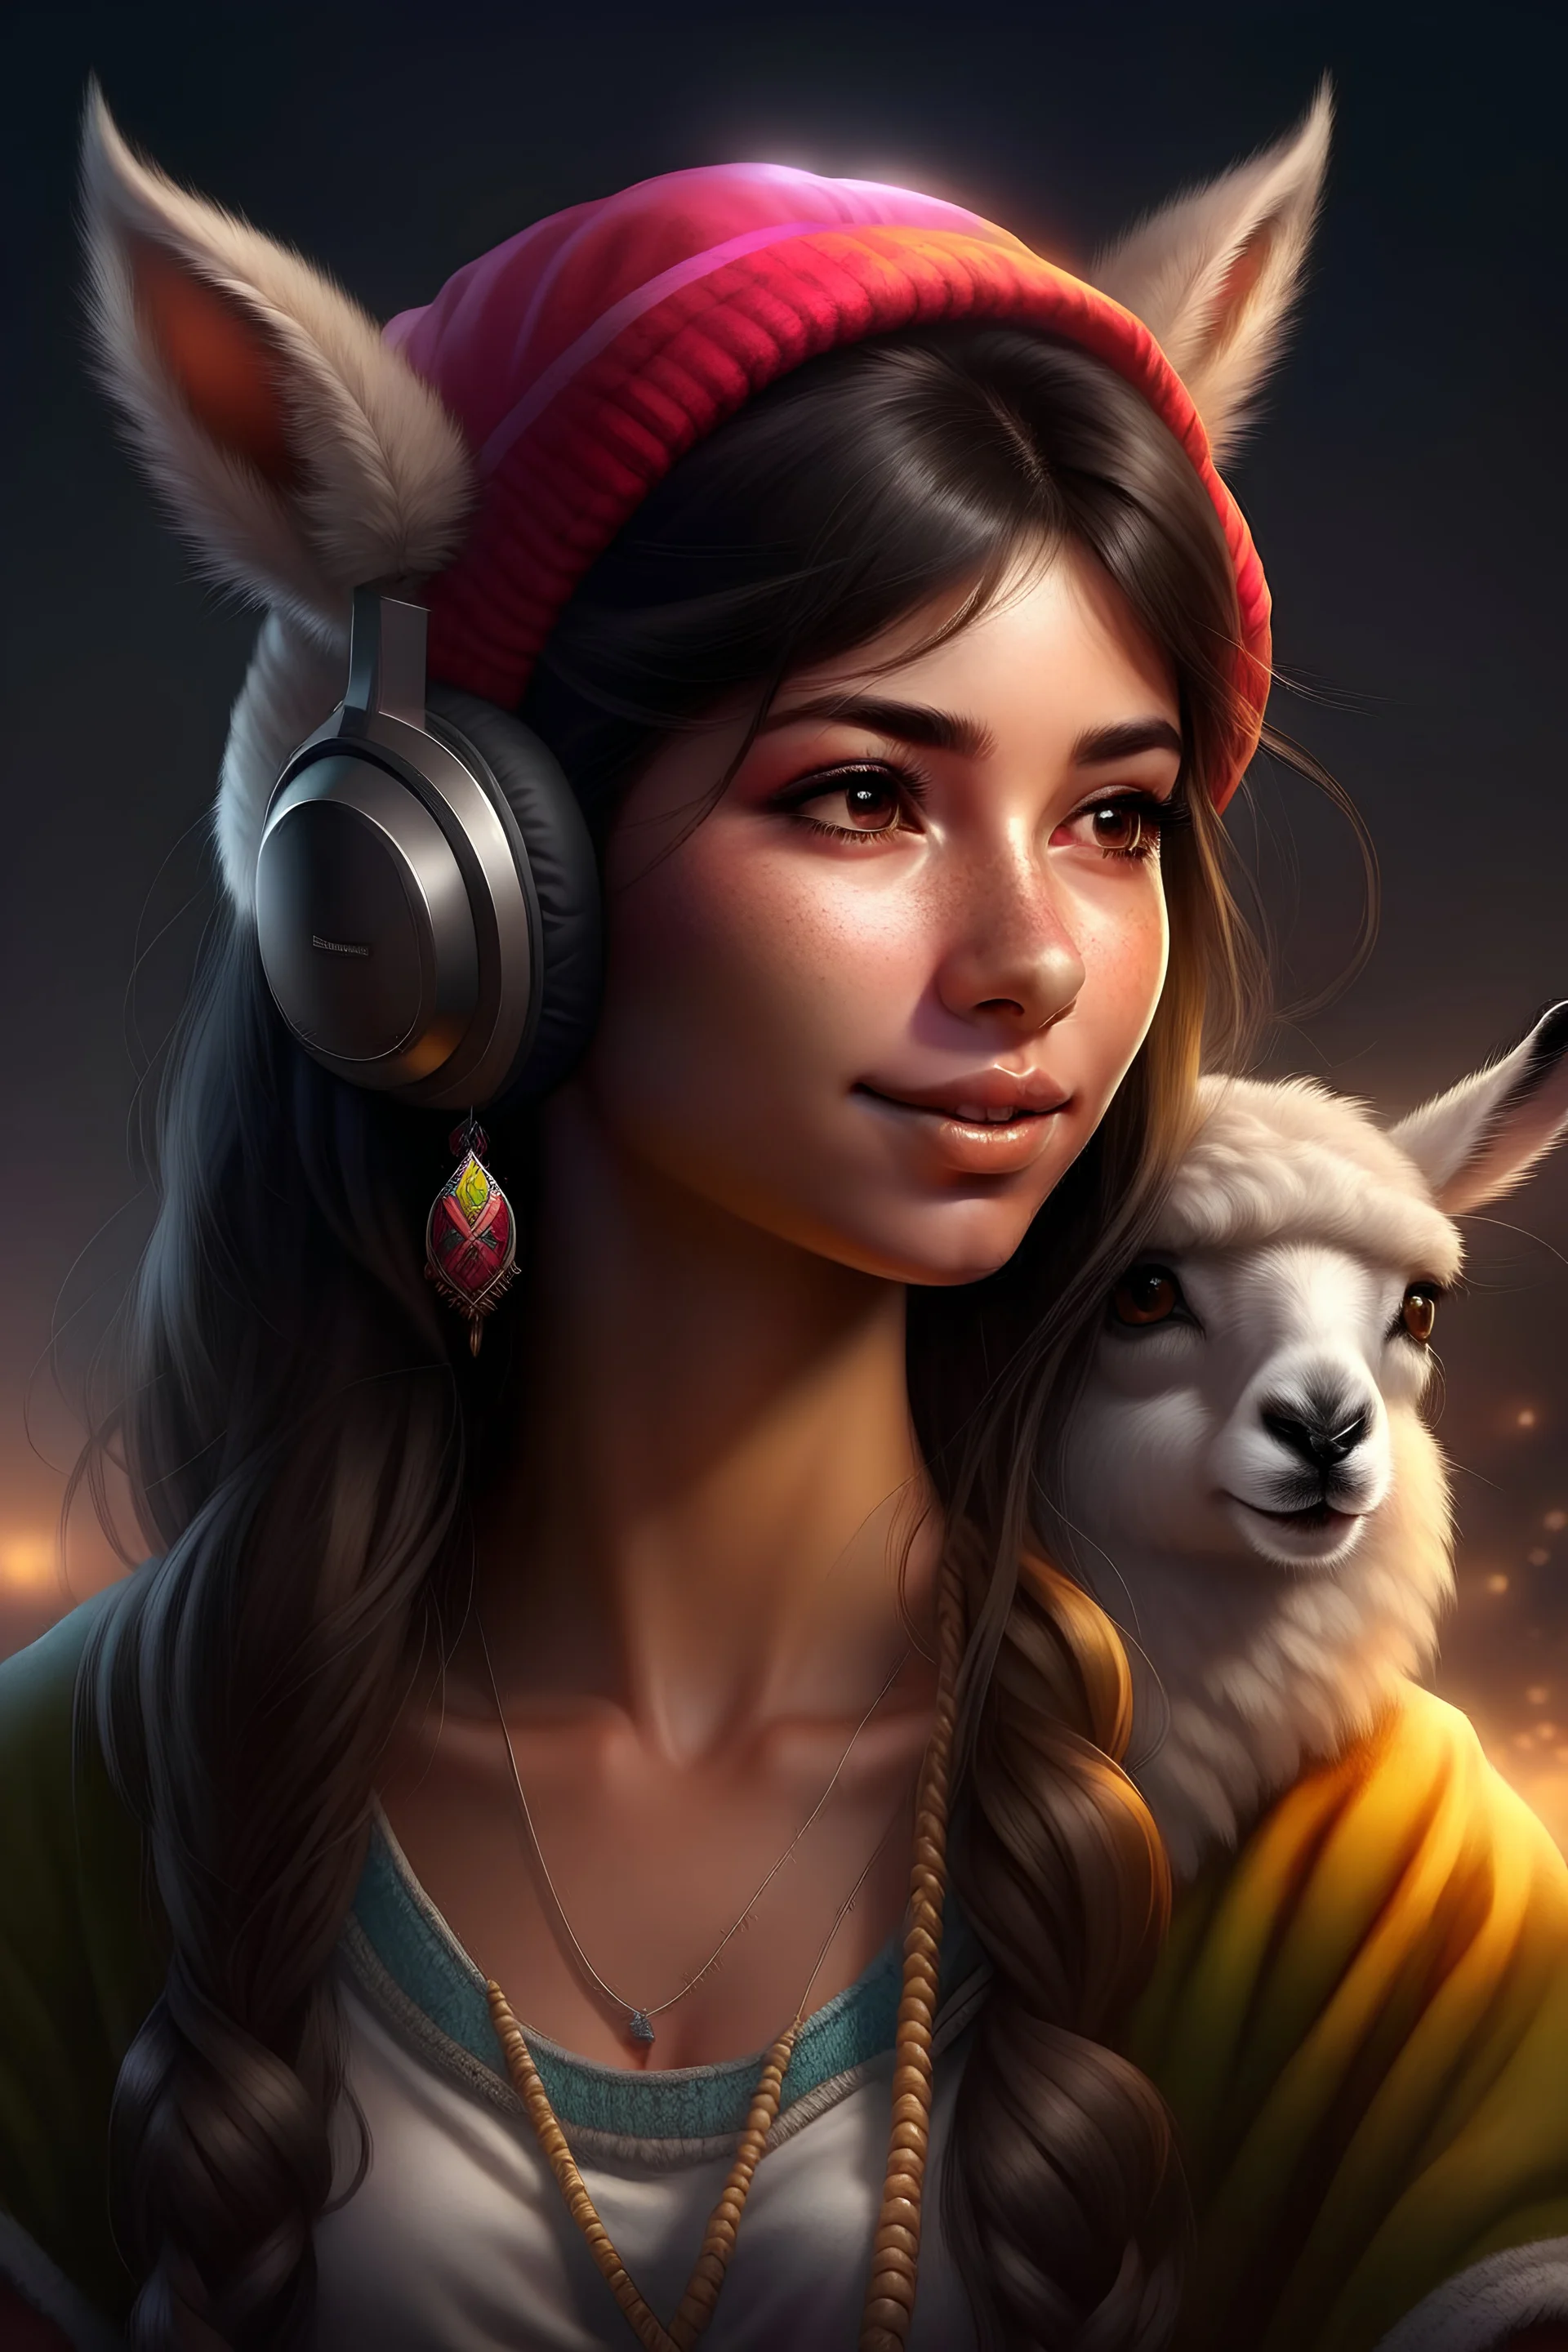 Digital art, high quality, digital masterpiece, natural illumination, realistic, action film style, (full body:2.5), (1 young peruvian girl:3), (dark brown hair:1.8), (sexy green eyes:1.8), (llama ears on head:2.3), (fluffy llama ears:1.8), (llama ears headband:1.8), (tall:1.8), (White peruvian swimsuit:1.8), Peruvian patterns, (Peruvian town at background:1.8), Peruvian town, Divine shine, sunny day, (Sun in the sky:2)